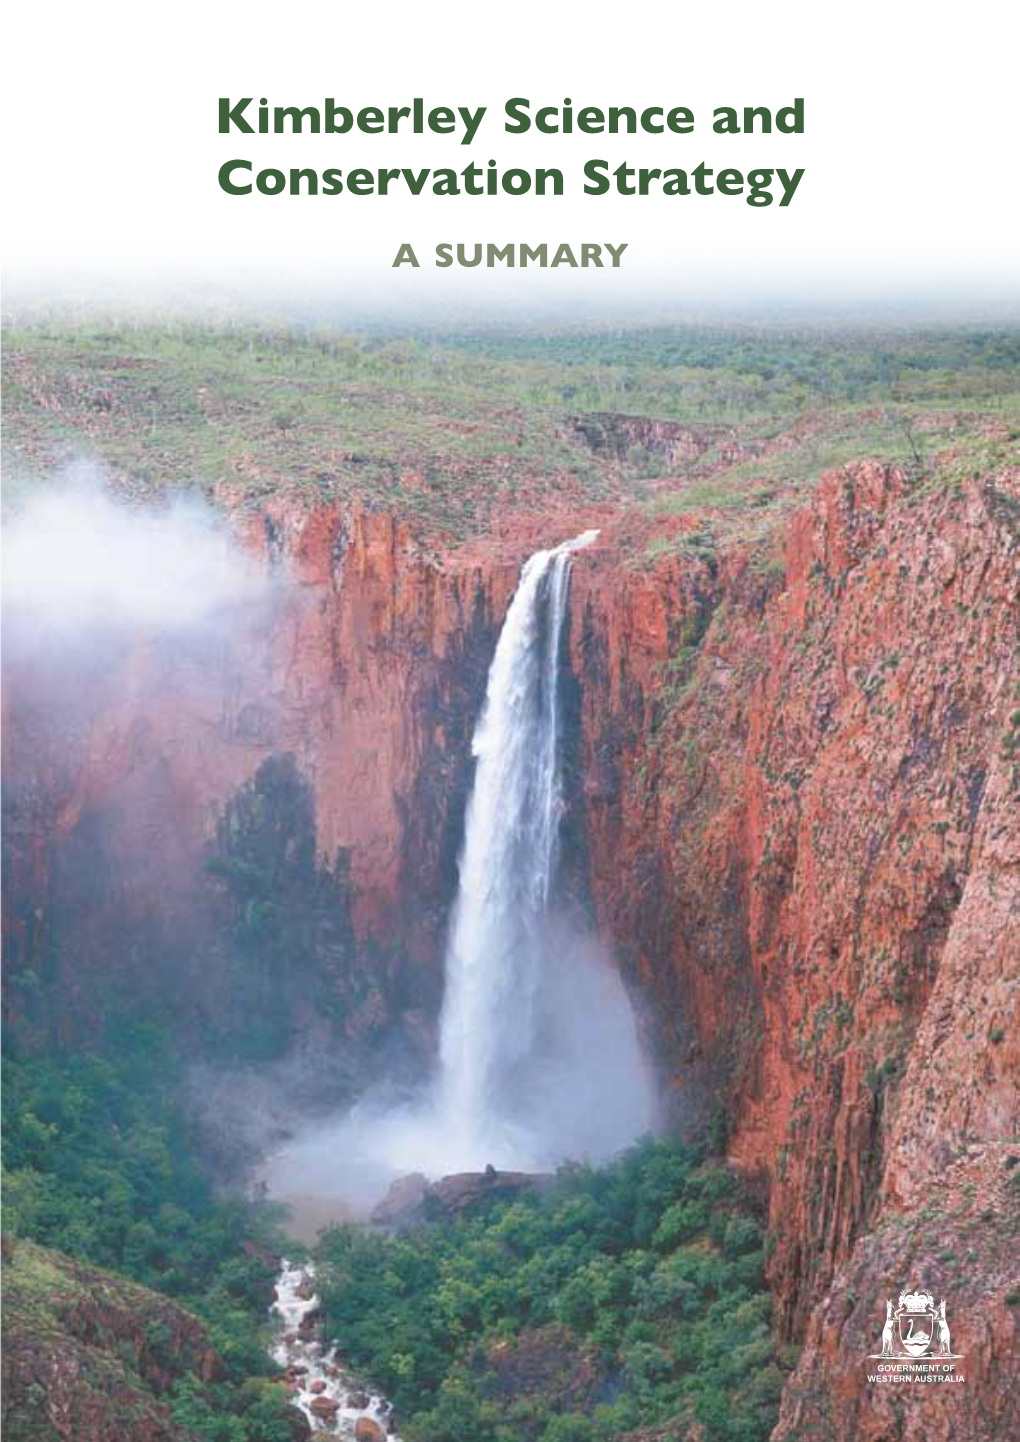 Kimberley Science and Conservation Strategy